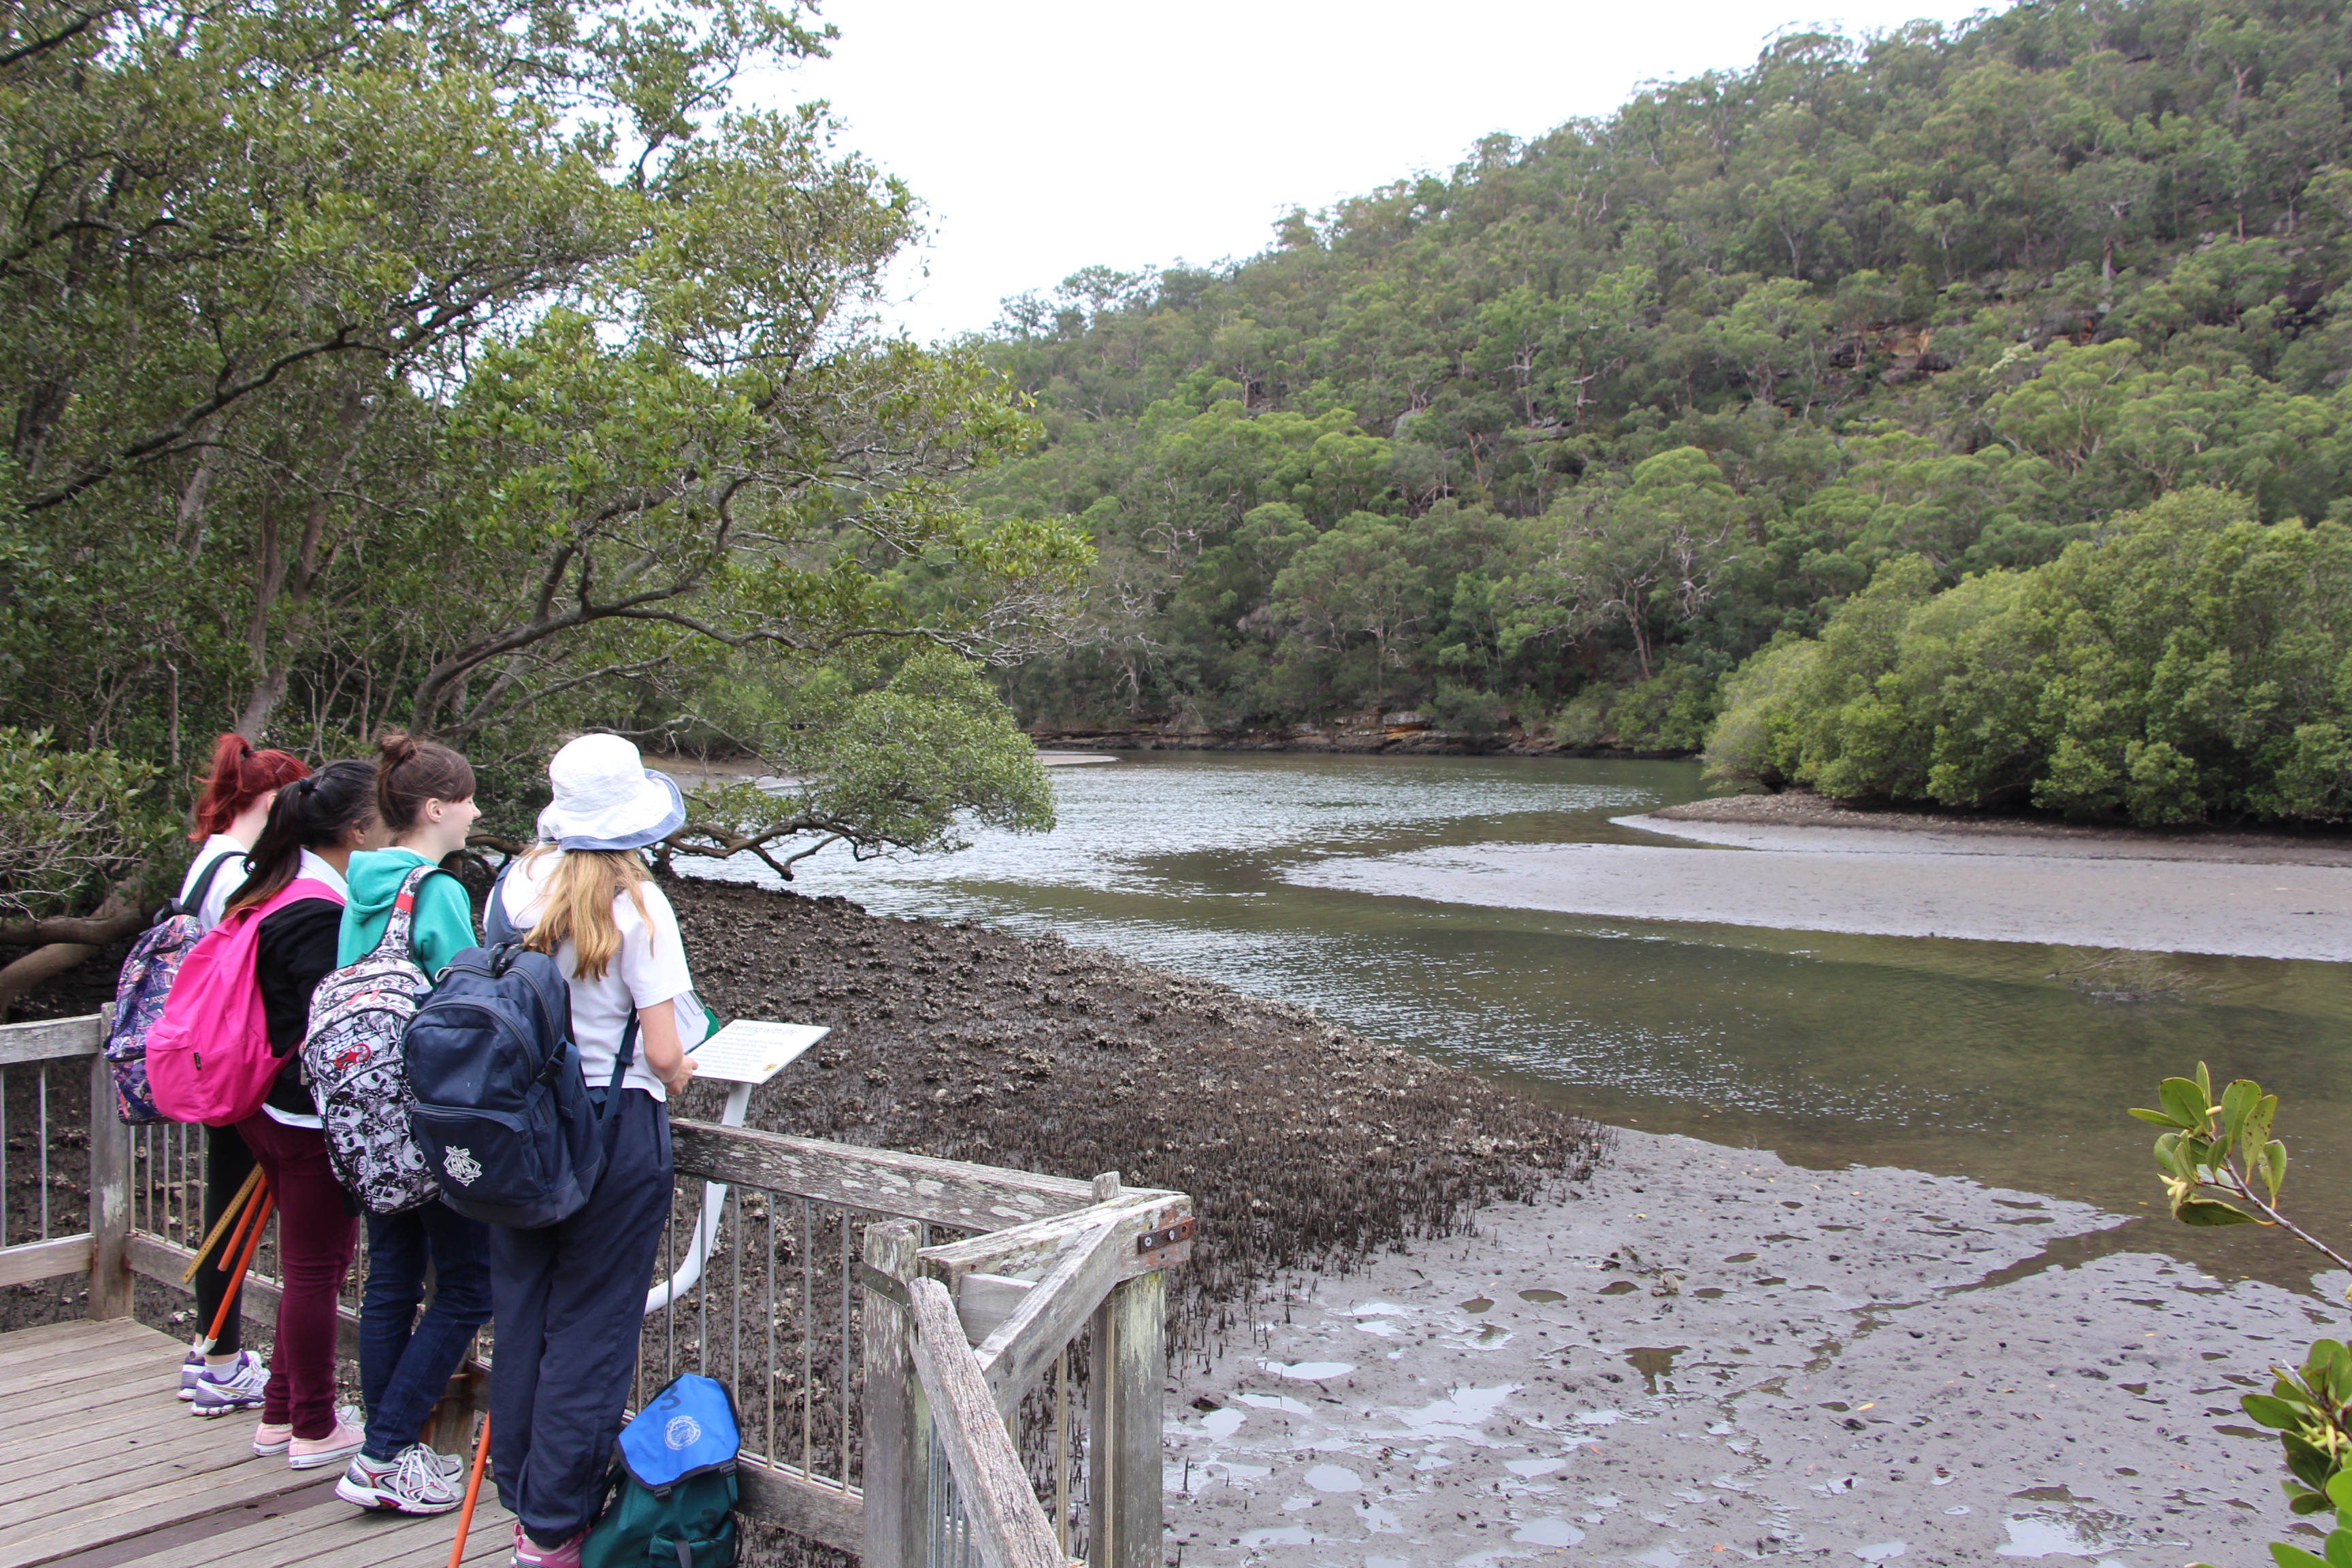 Students stand in a group on a walkway looking out of a river with mangrove flats on each side.